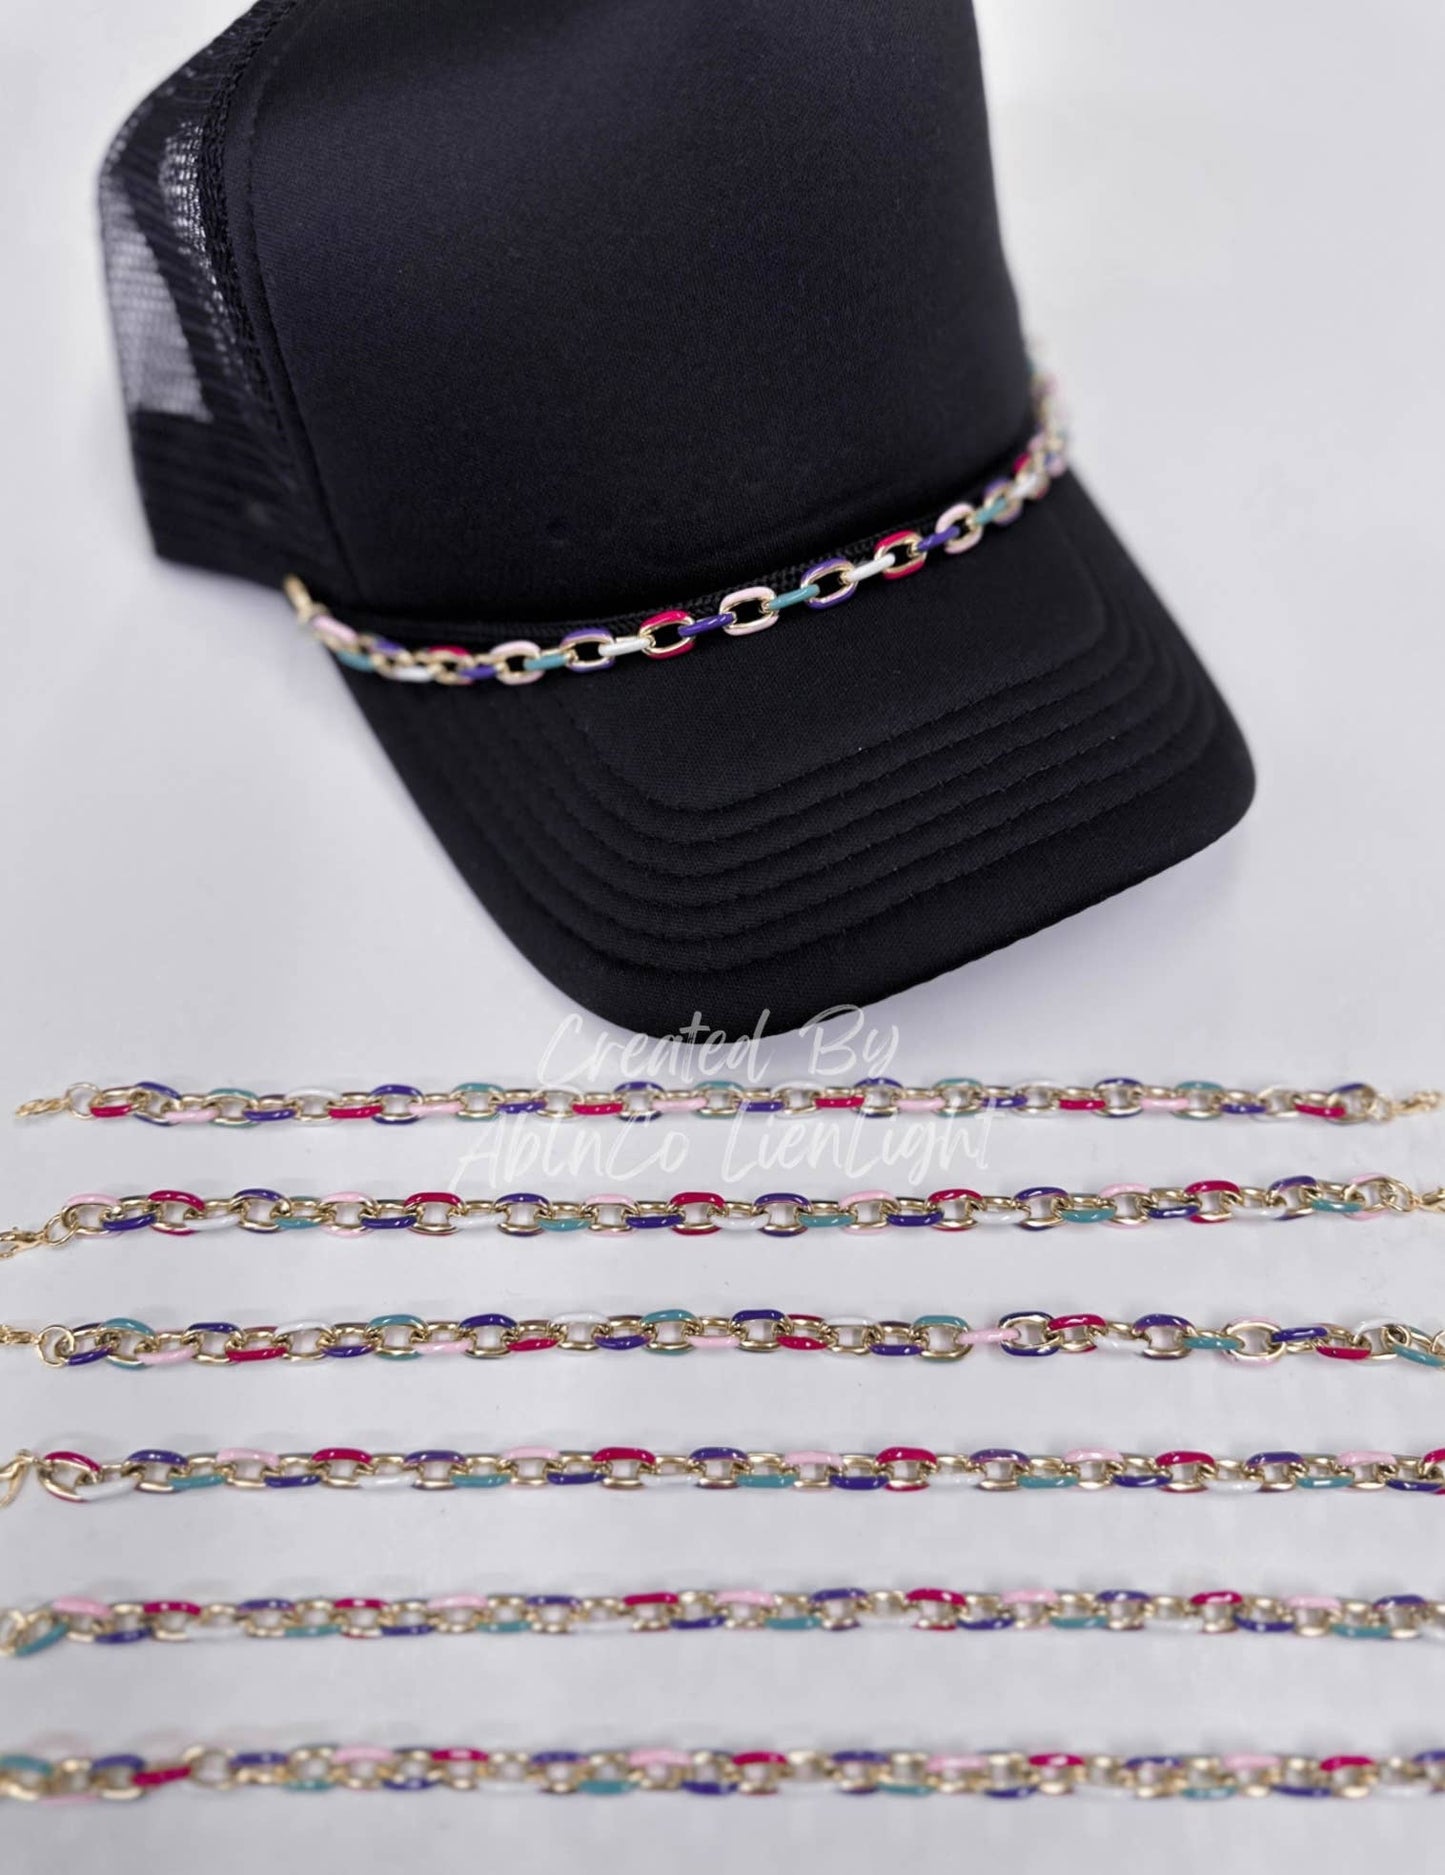 Multi color links trucker hat chain, chains for hats: Multi color links